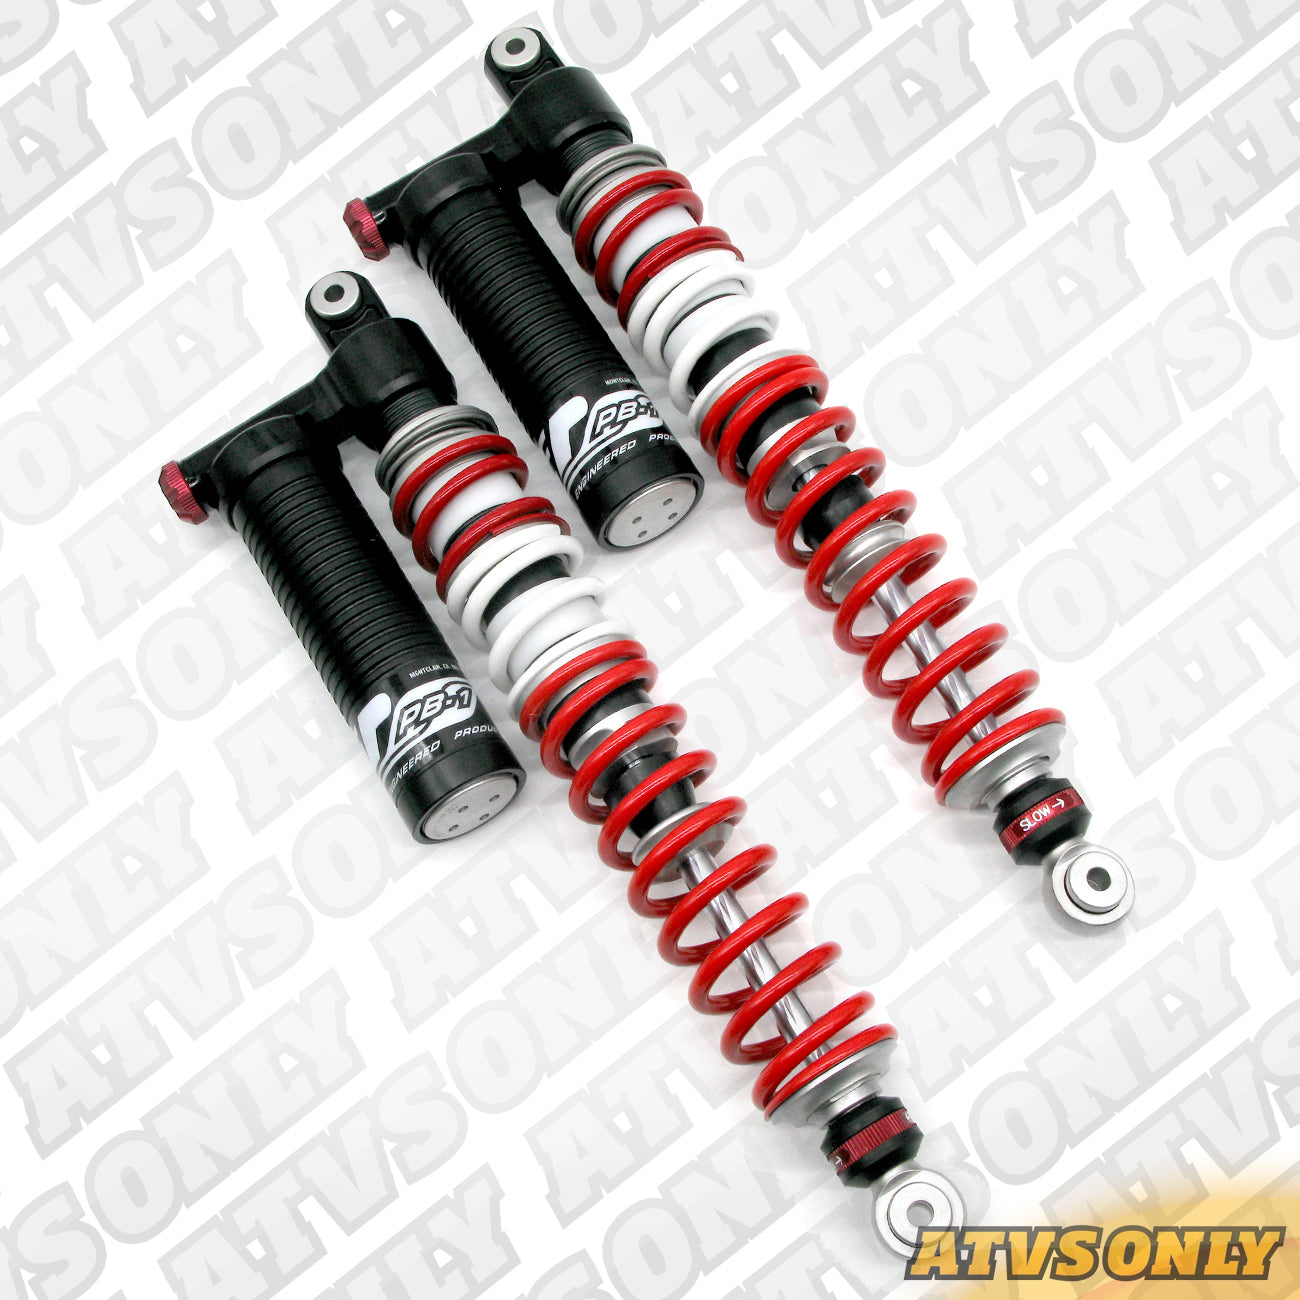 Suspension - PEP PB-1 Front Shock Absorbers